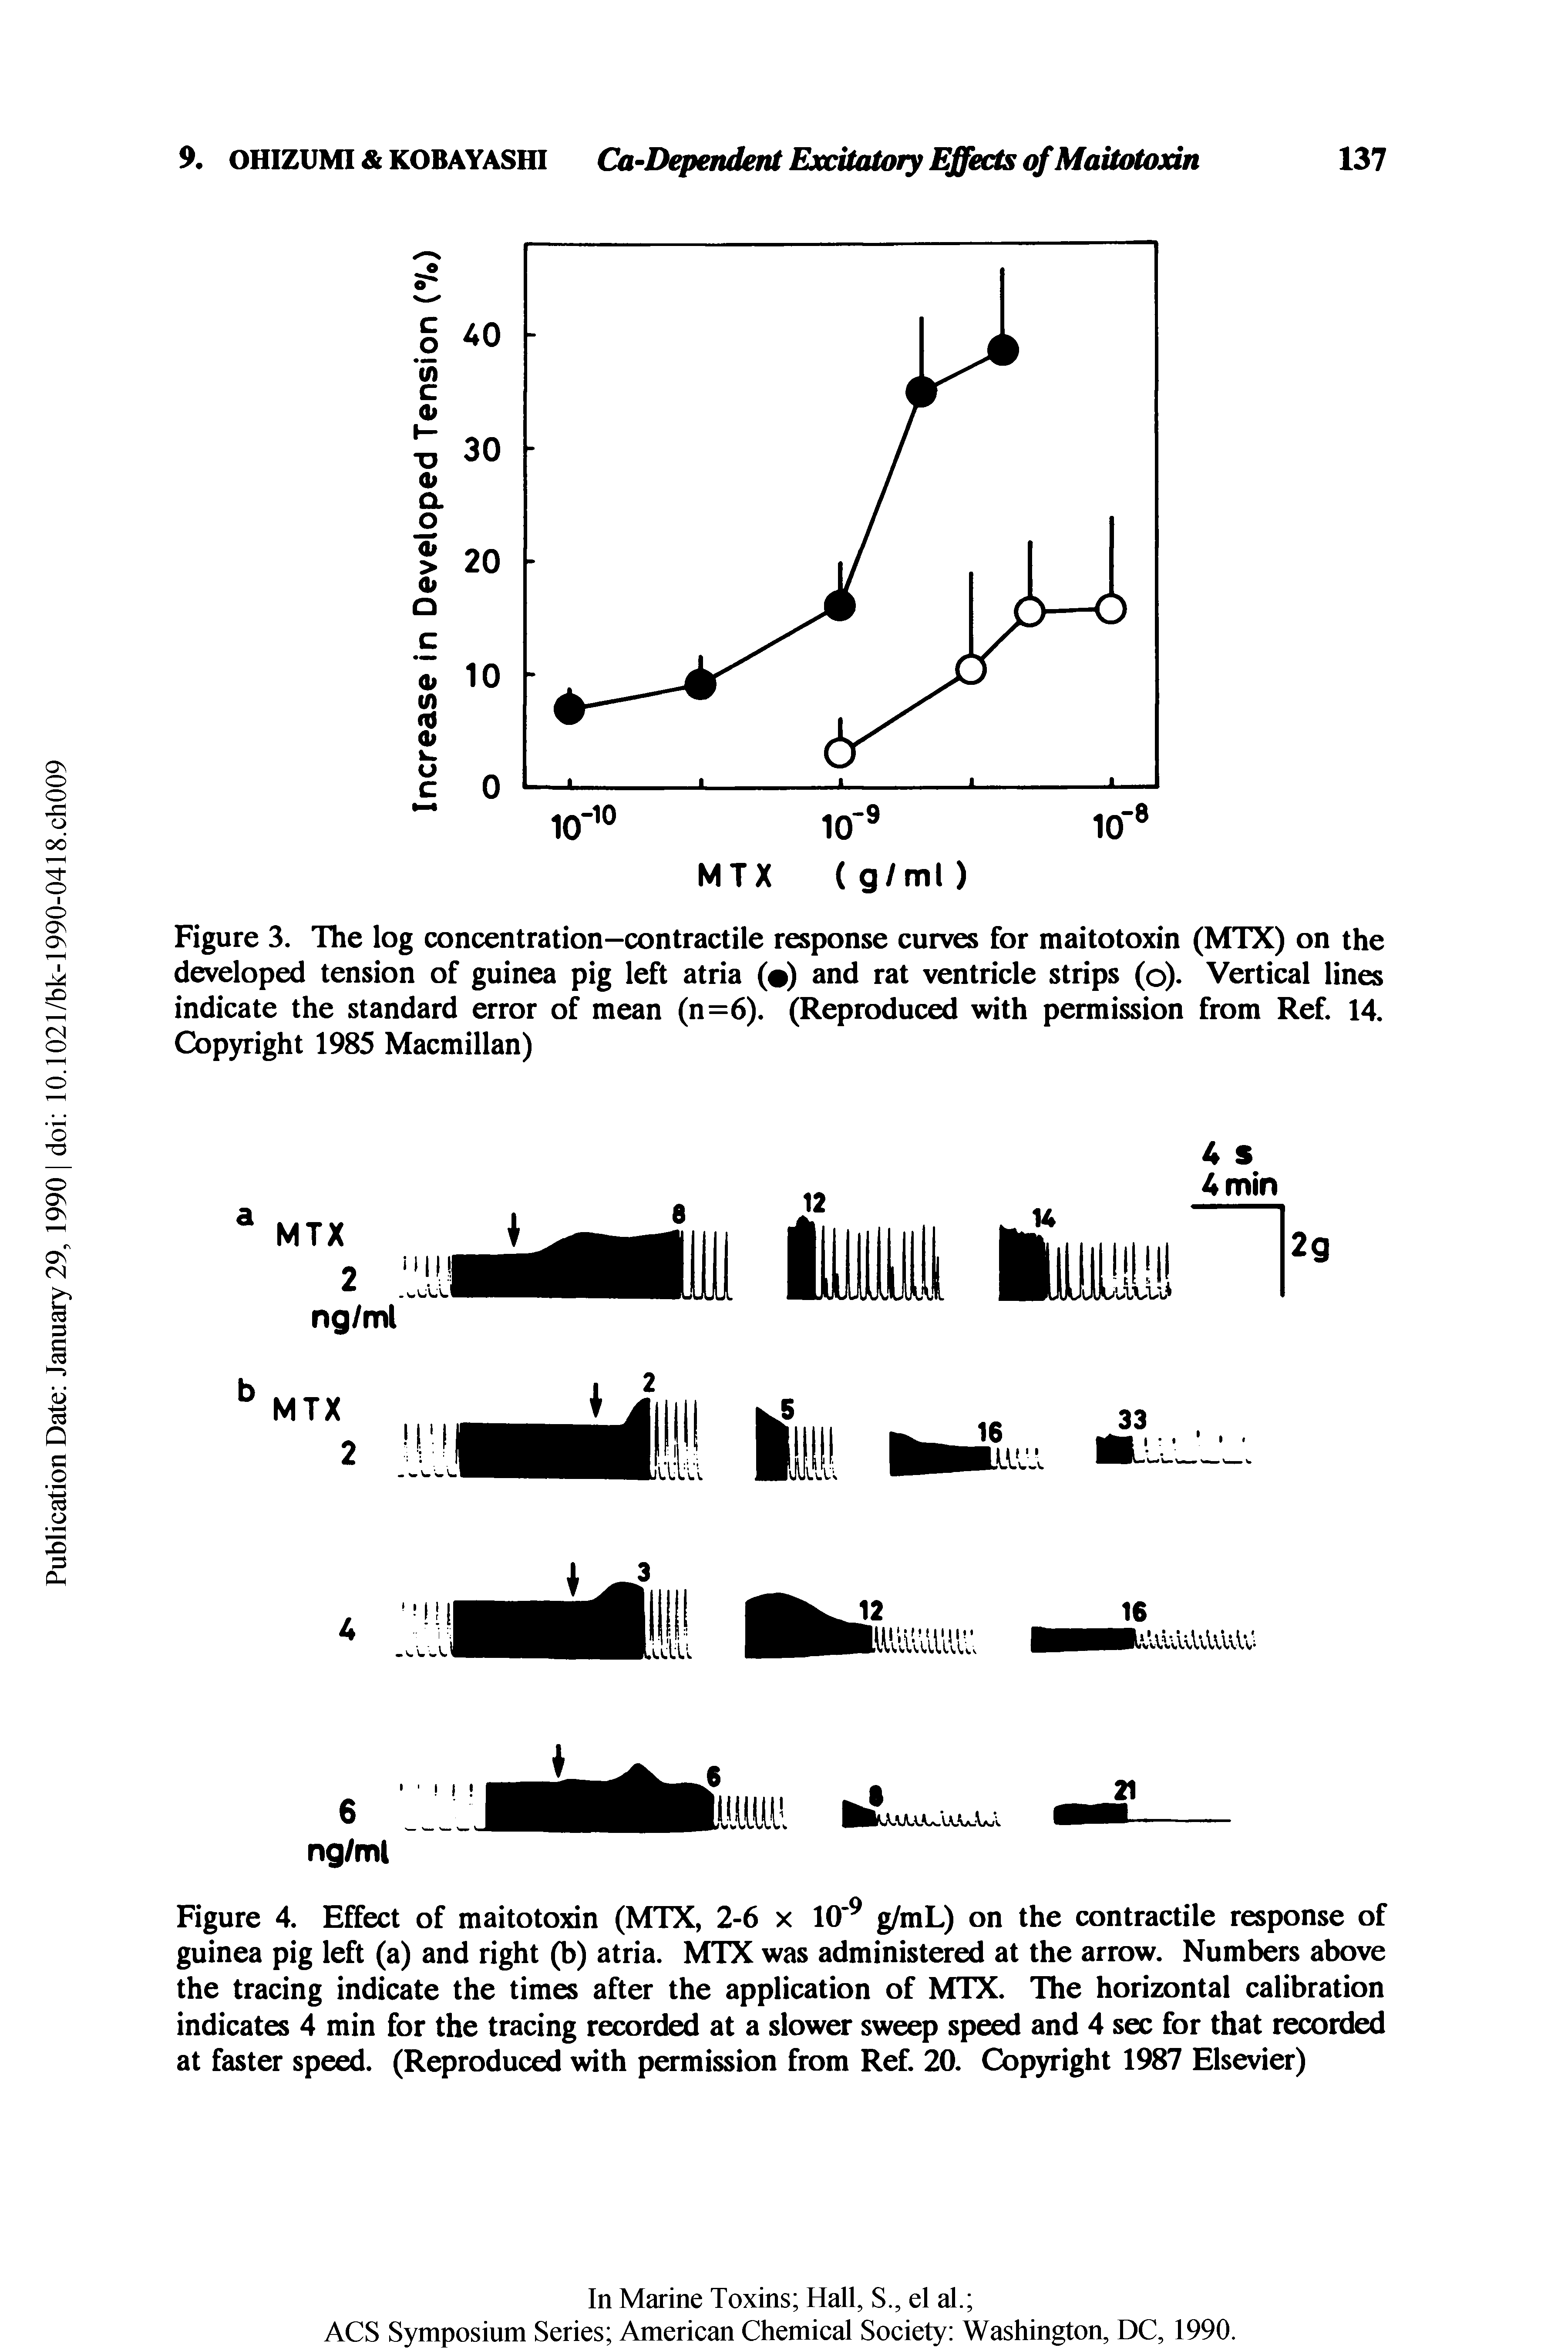 Figure 4. Effect of maitotoxin (MTX, 2-6 x 10 g/mL) on the contractile response of guinea pig left (a) and right (b) atria. MTX was administered at the arrow. Numbers above the tracing indicate the times after the application of MTX. The horizontal calibration indicates 4 min for the tracing recorded at a slower sweep speed and 4 sec for that recorded at faster speed. (Reproduced with permission from Ref. 20. Copyright 1987 Elsevier)...